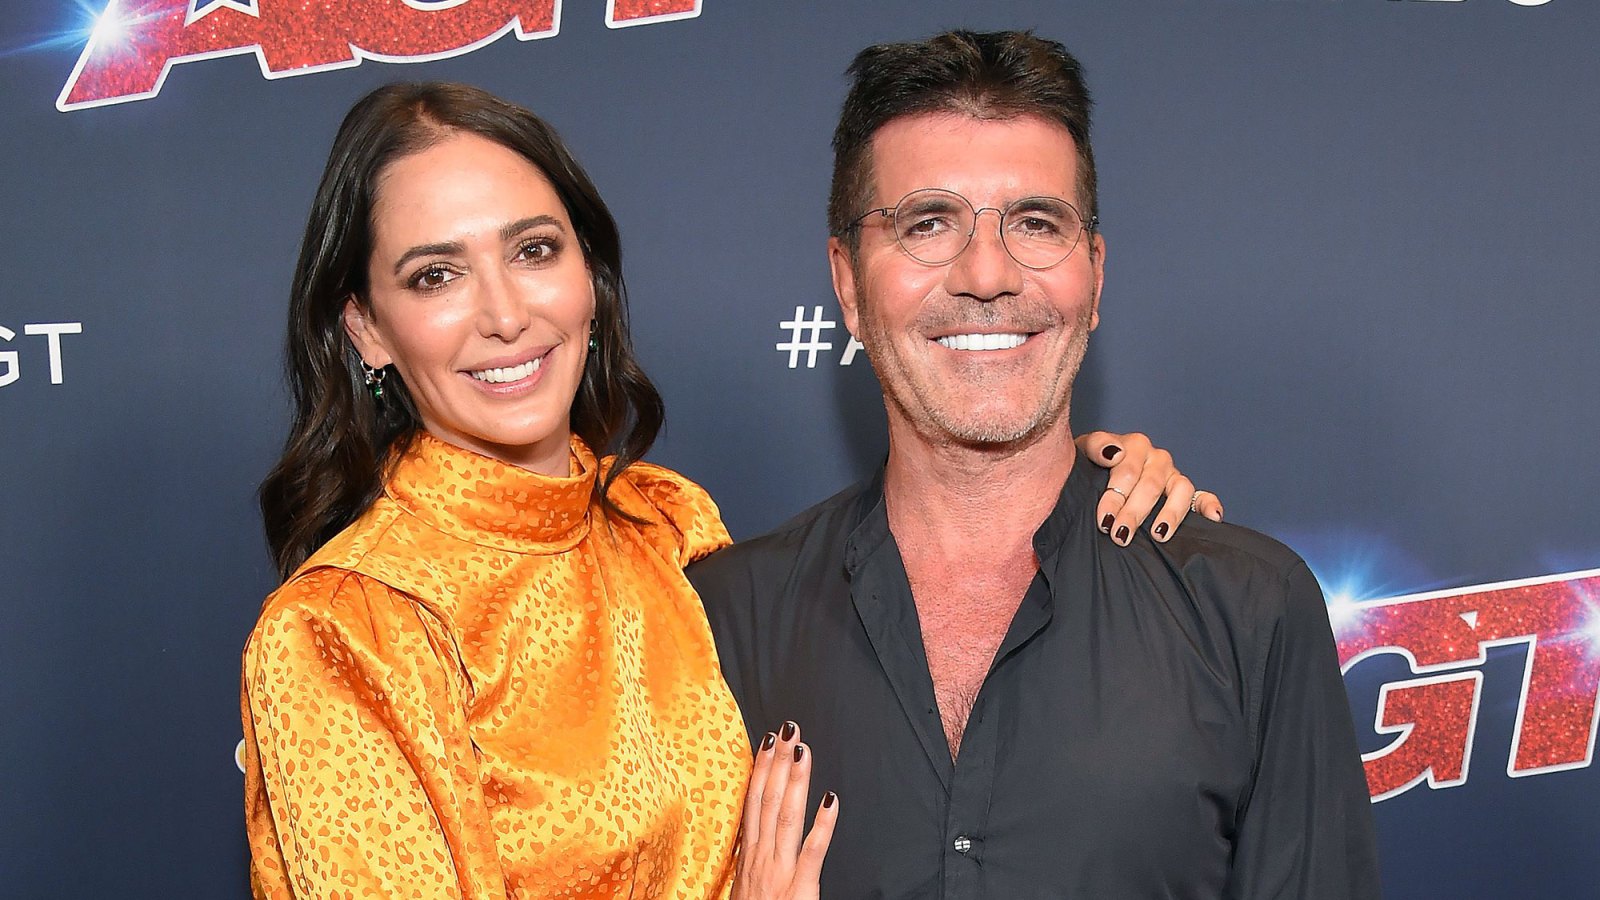 Simon Cowell and Lauren Silverman Are Engaged After More Than 10 Years